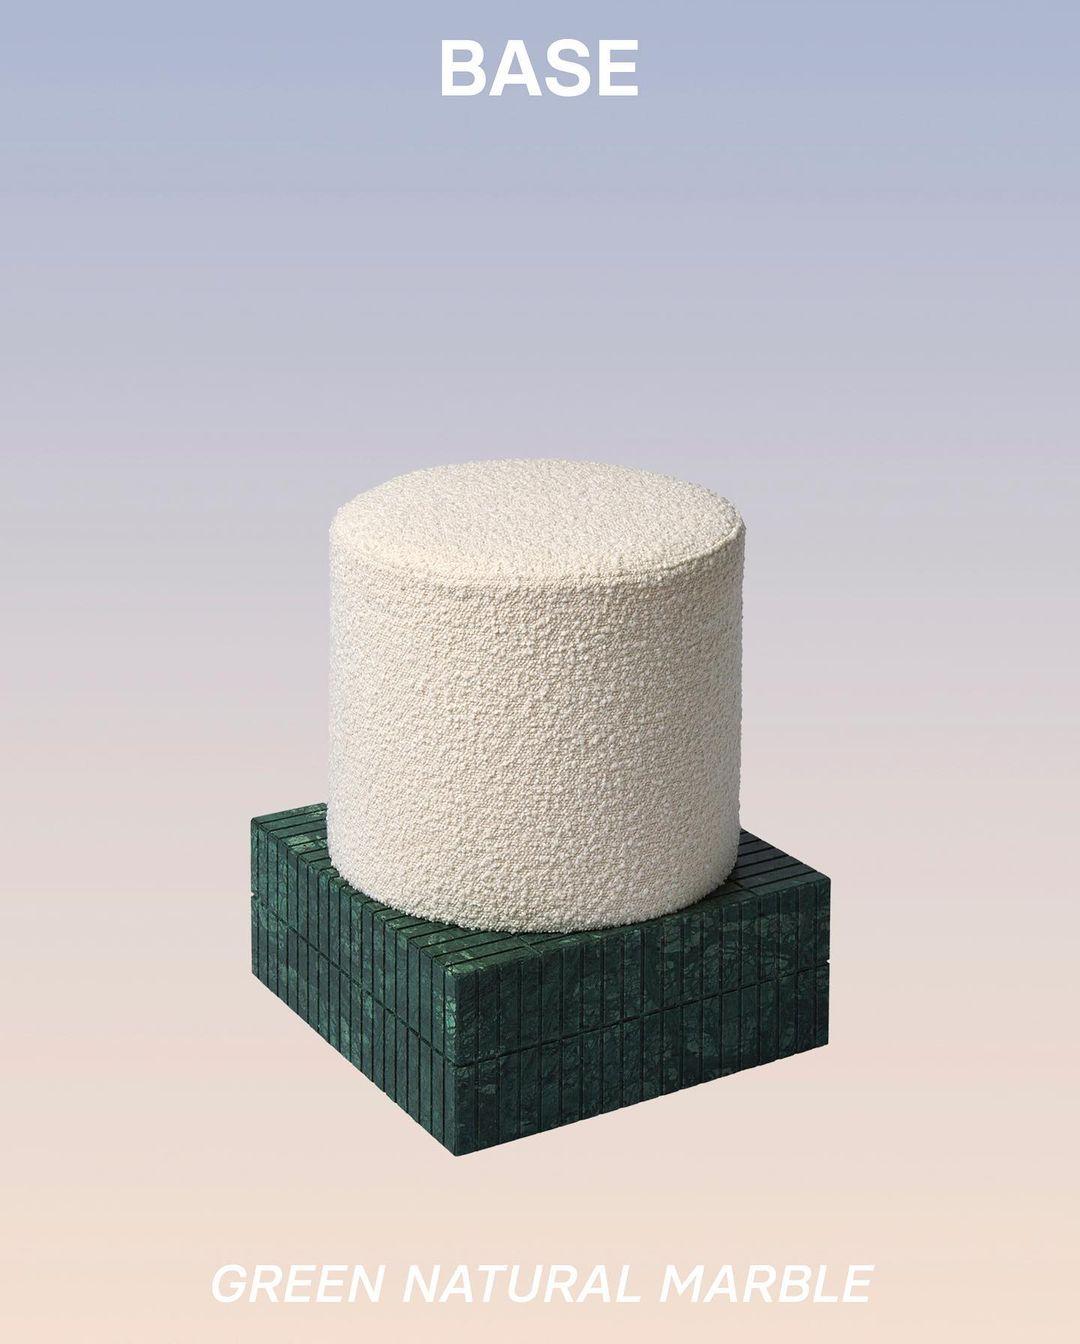 Base Green Pouf by Houtique
Materials: Upholstery, Marble
Dimensions: D37 x W37 x H45 cm

Designed by Houtique.
Made in Spain.
Marble base available in
two different textures: Smooth and grooved.
Option in four natural stones:
Triana Yellow